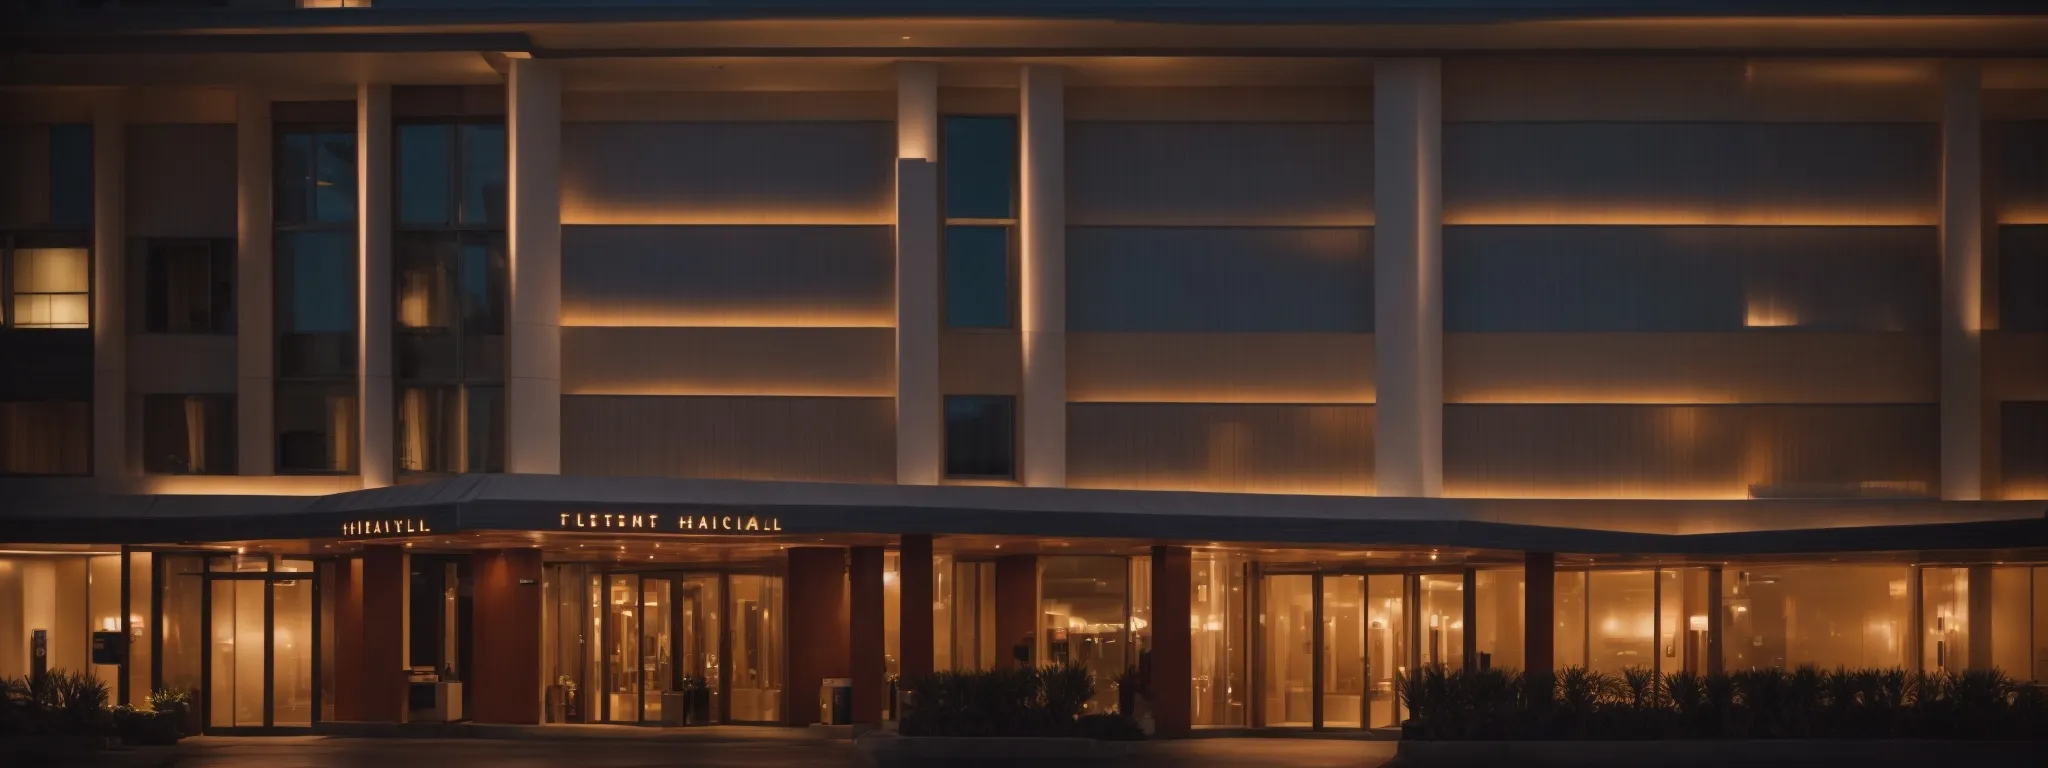 a hotel's welcoming façade bathed in warm lights at dusk, signaling prominence and readiness to greet local and traveling guests.